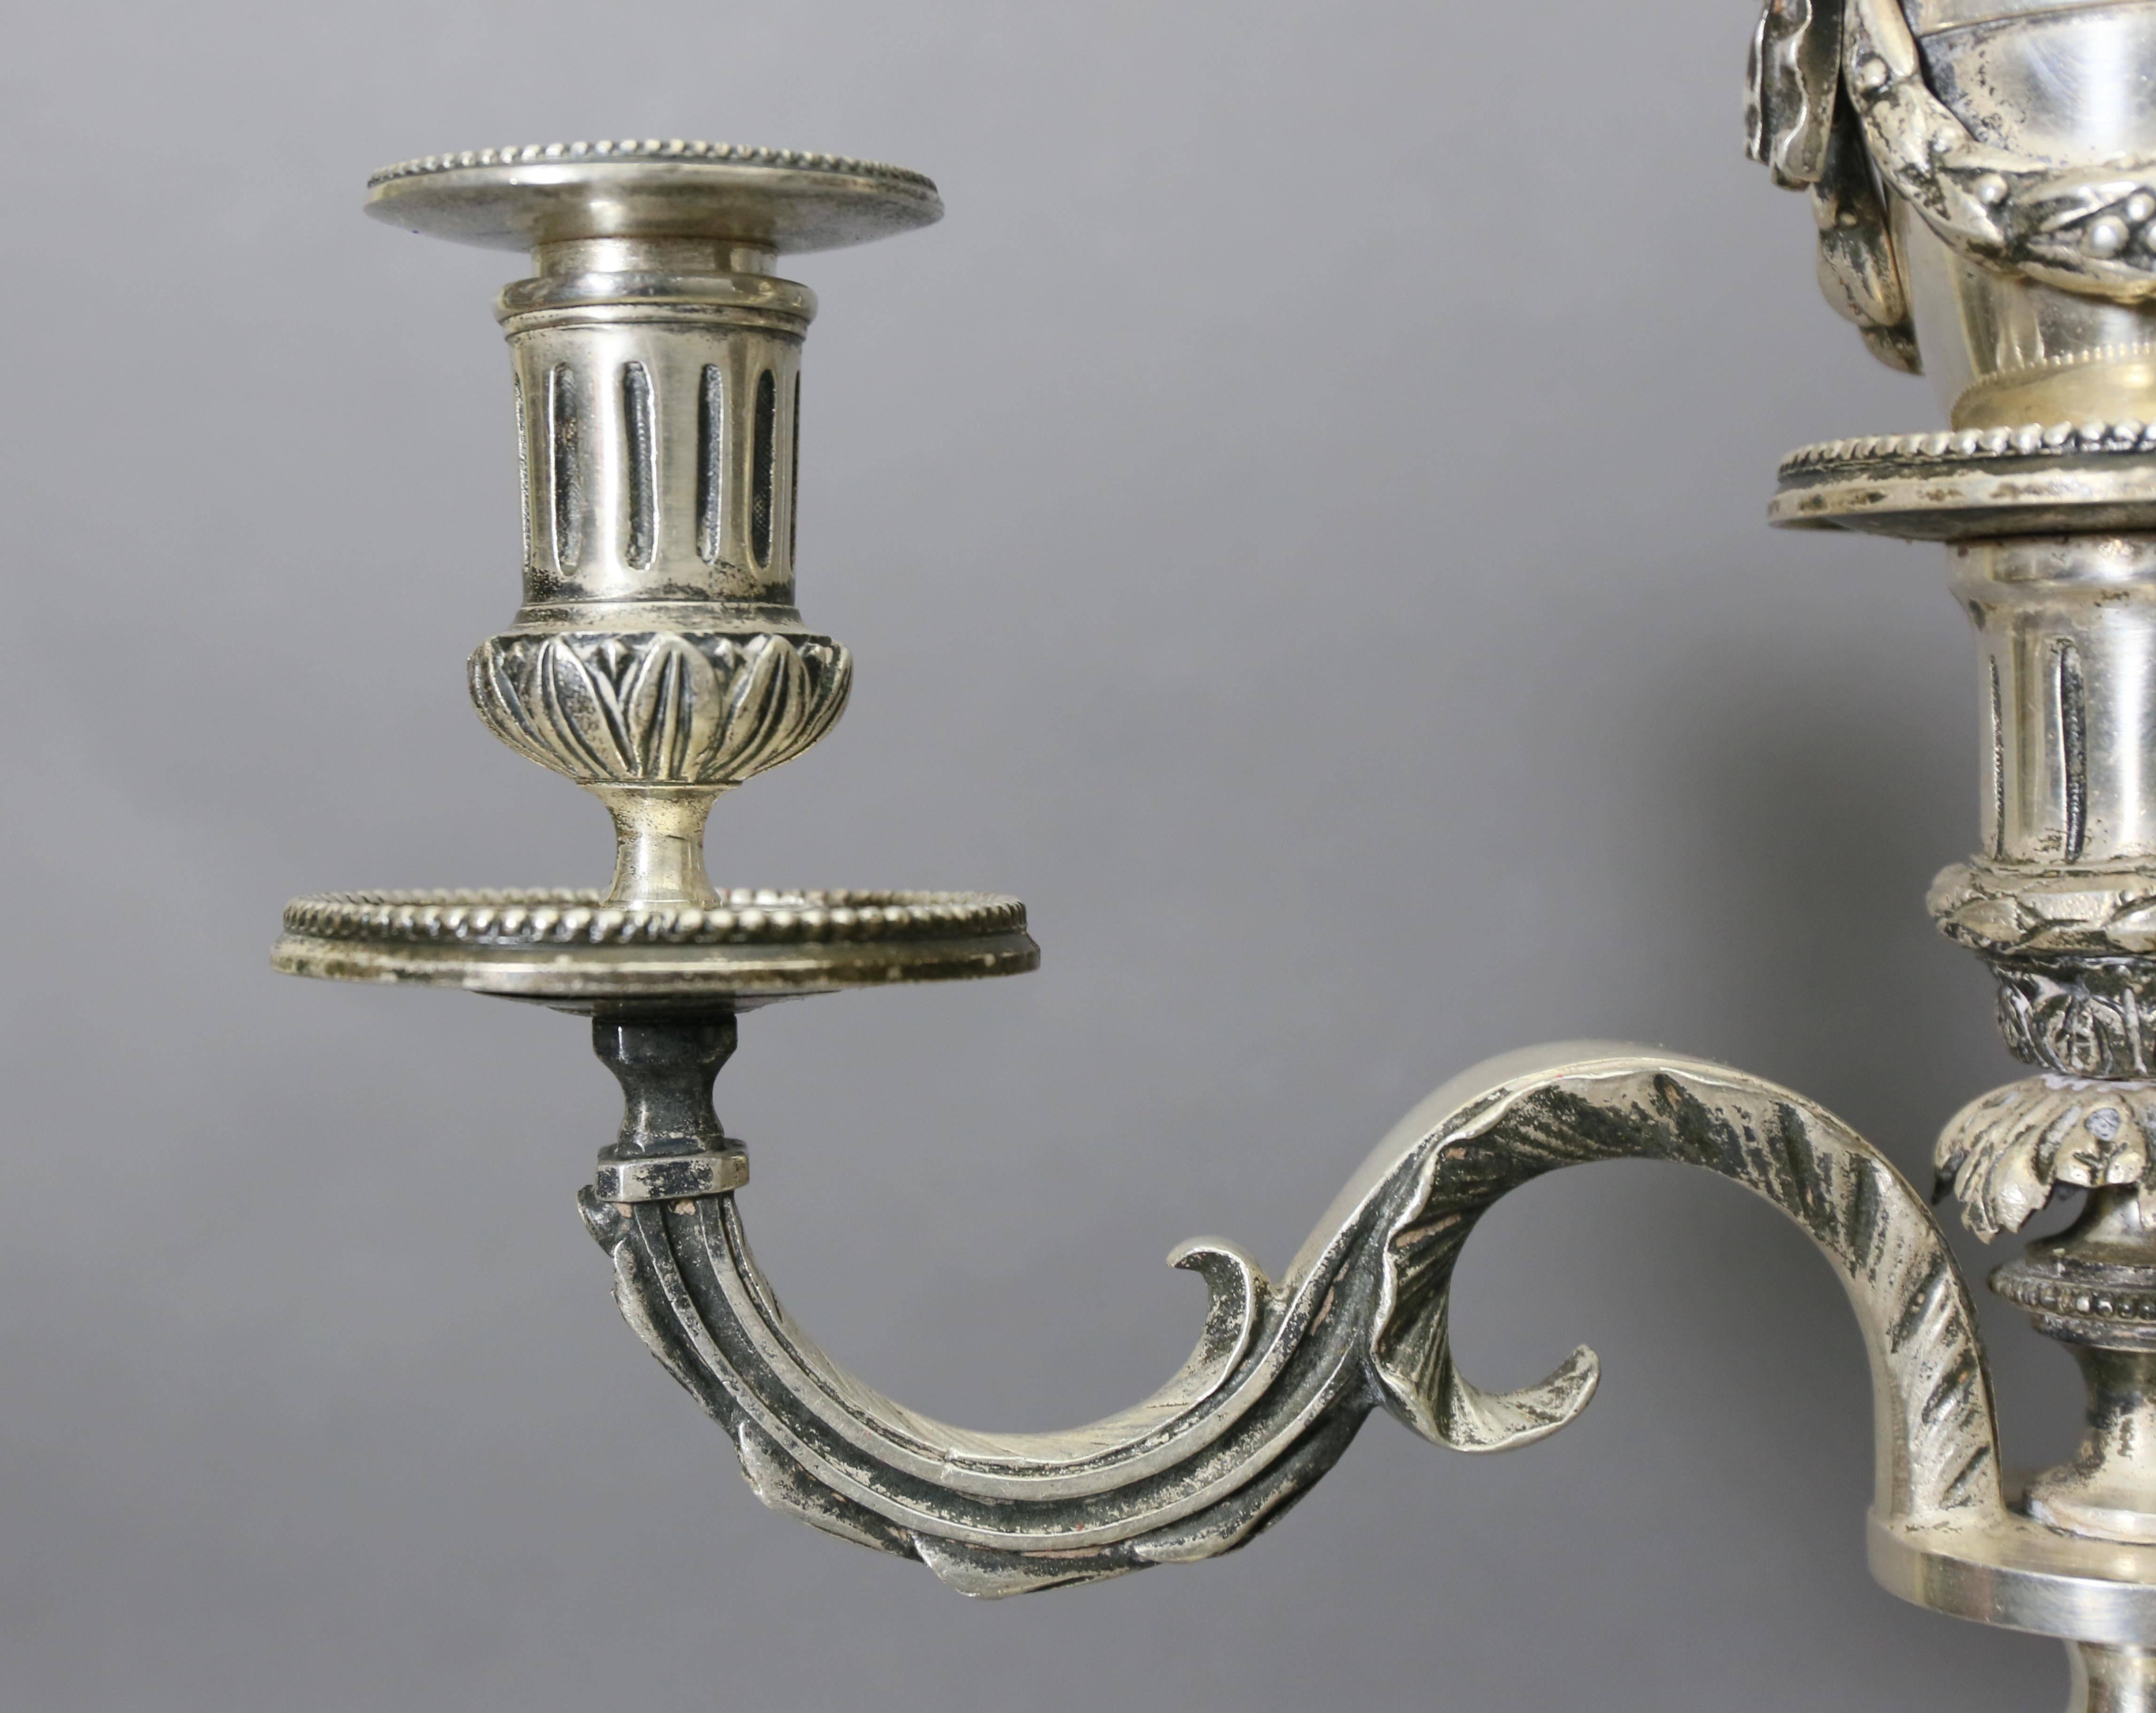 Each candelabra has intricate details of bows, leaves, and cording with tassels; with one bow missing from the back side. 

Candelabra were previously lamped.